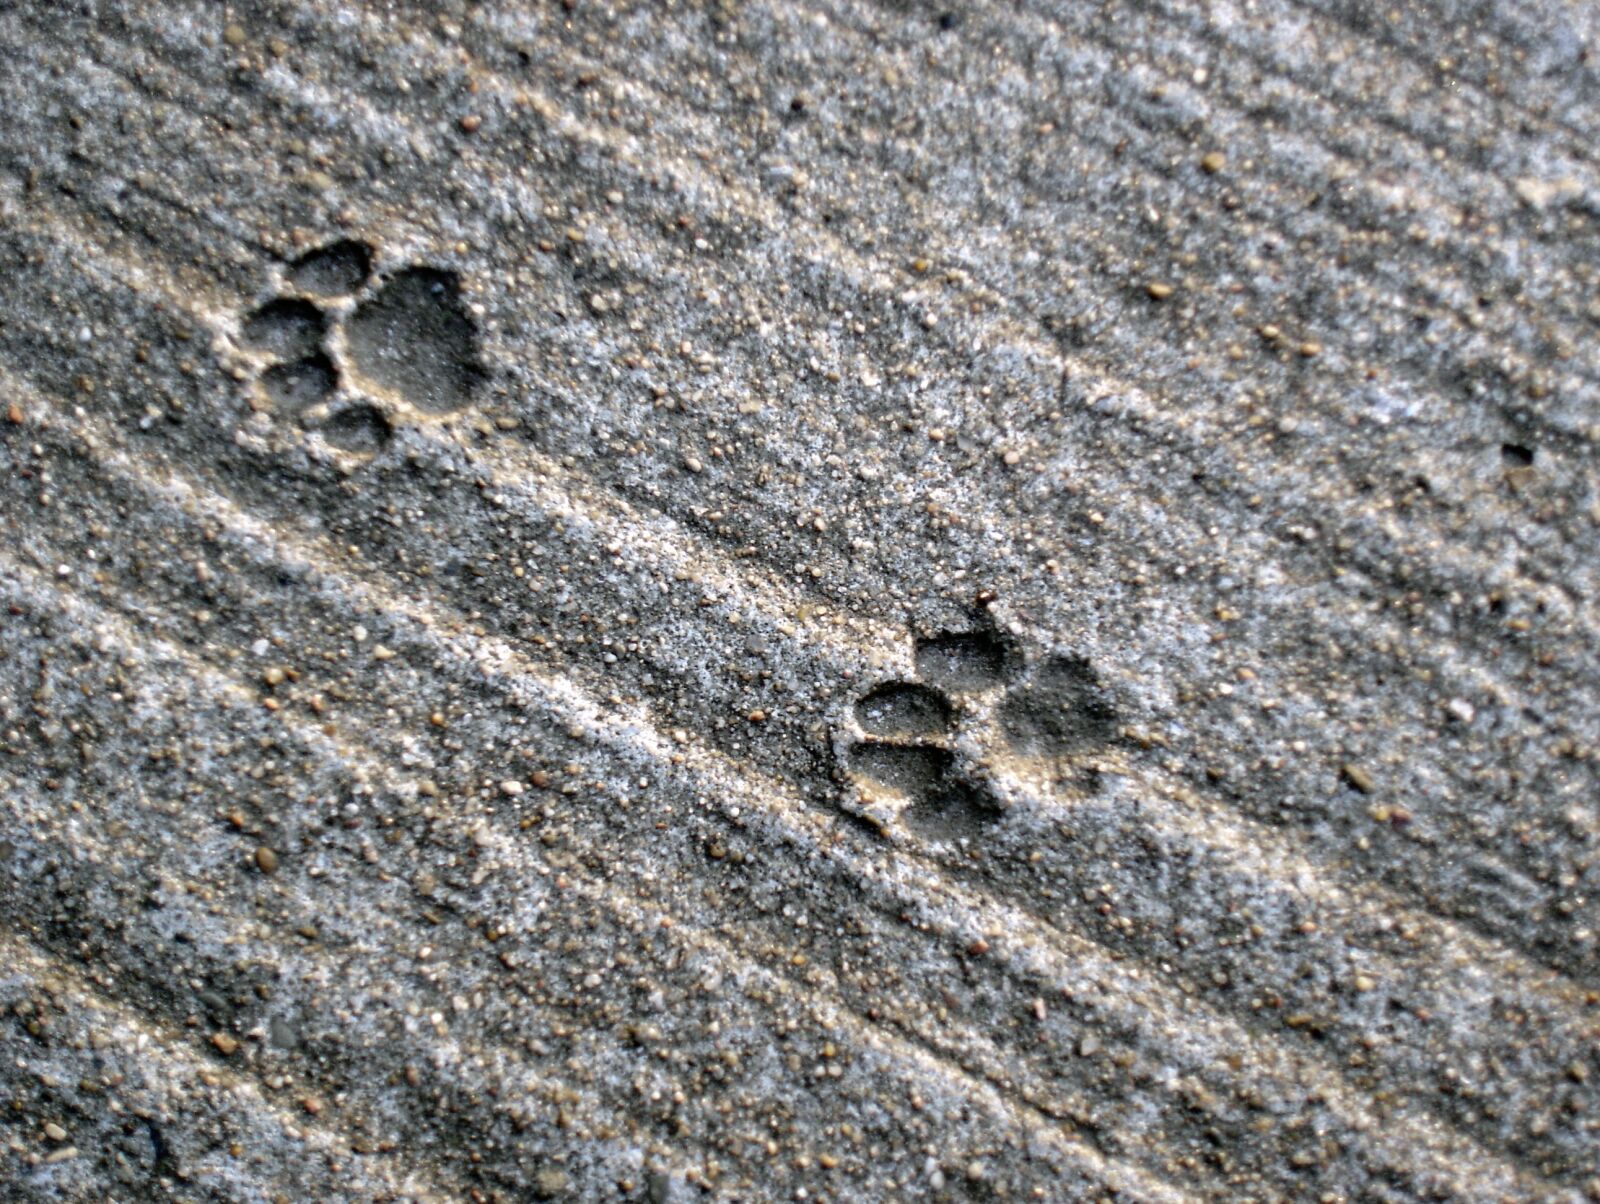 Sony DSC-W1 sample photo. Traces, cat, track photography